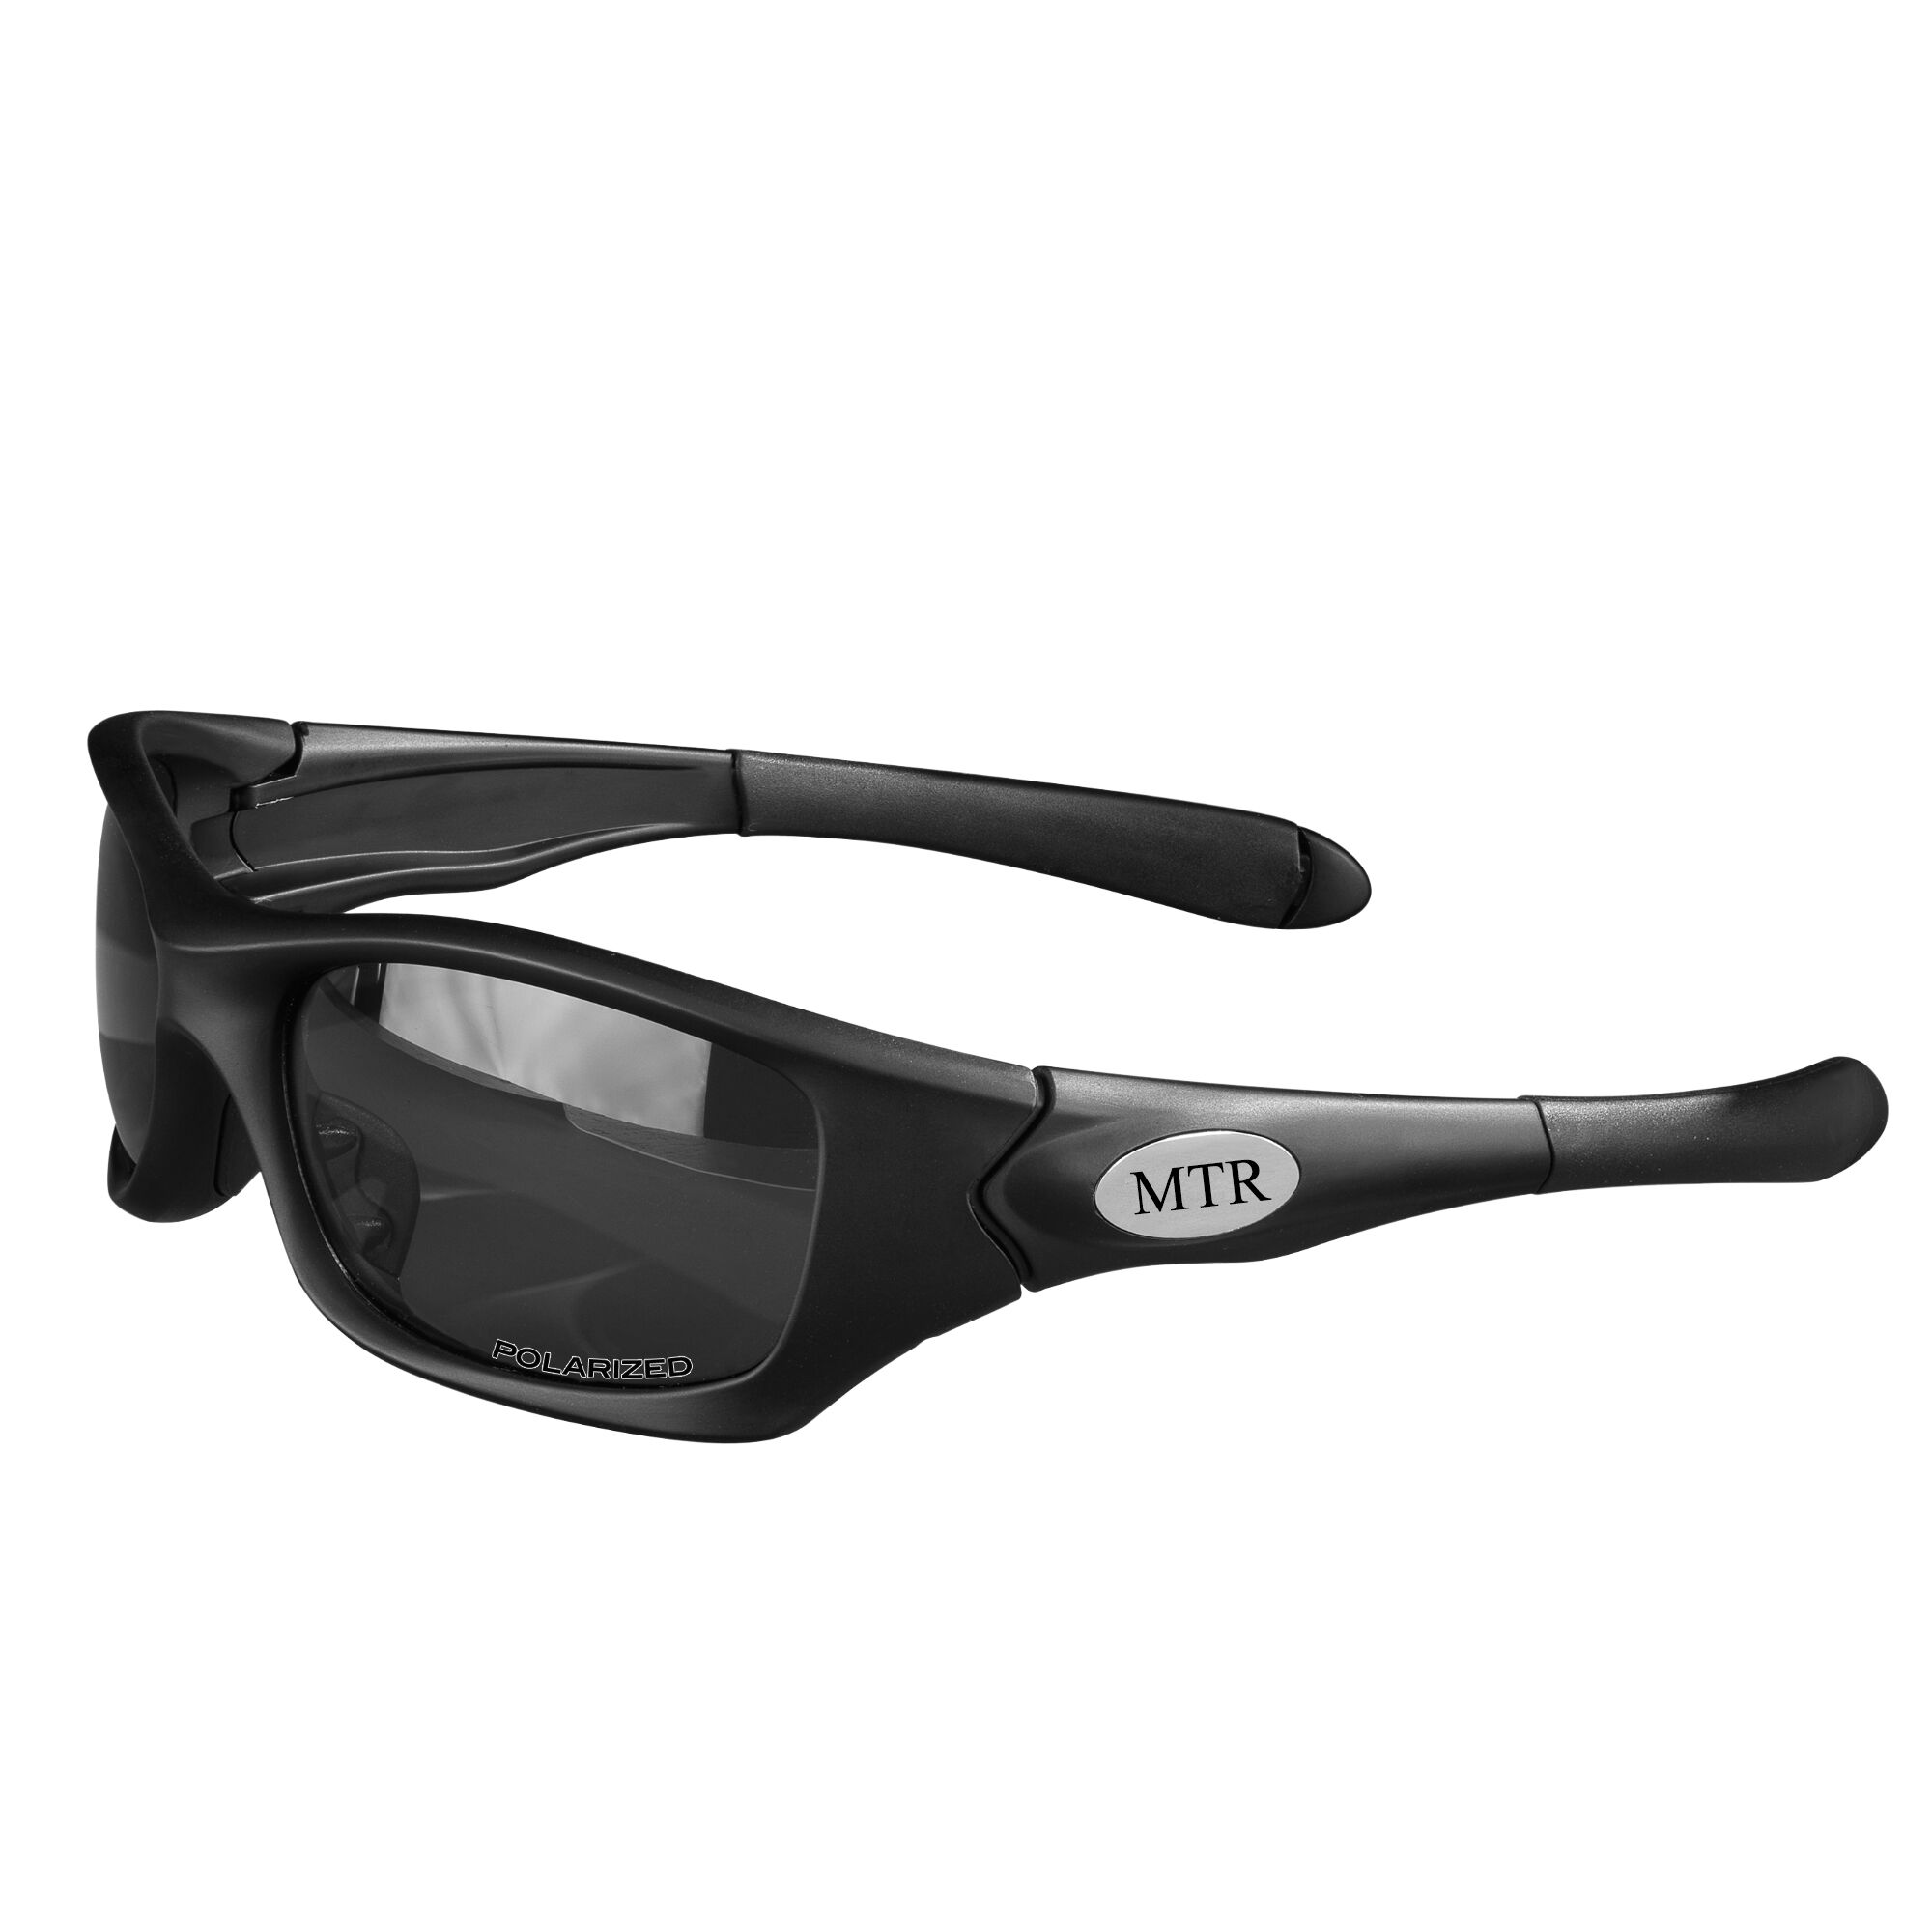 Personalized for My Son Polarized Sunglasses 10660 0009 b side view